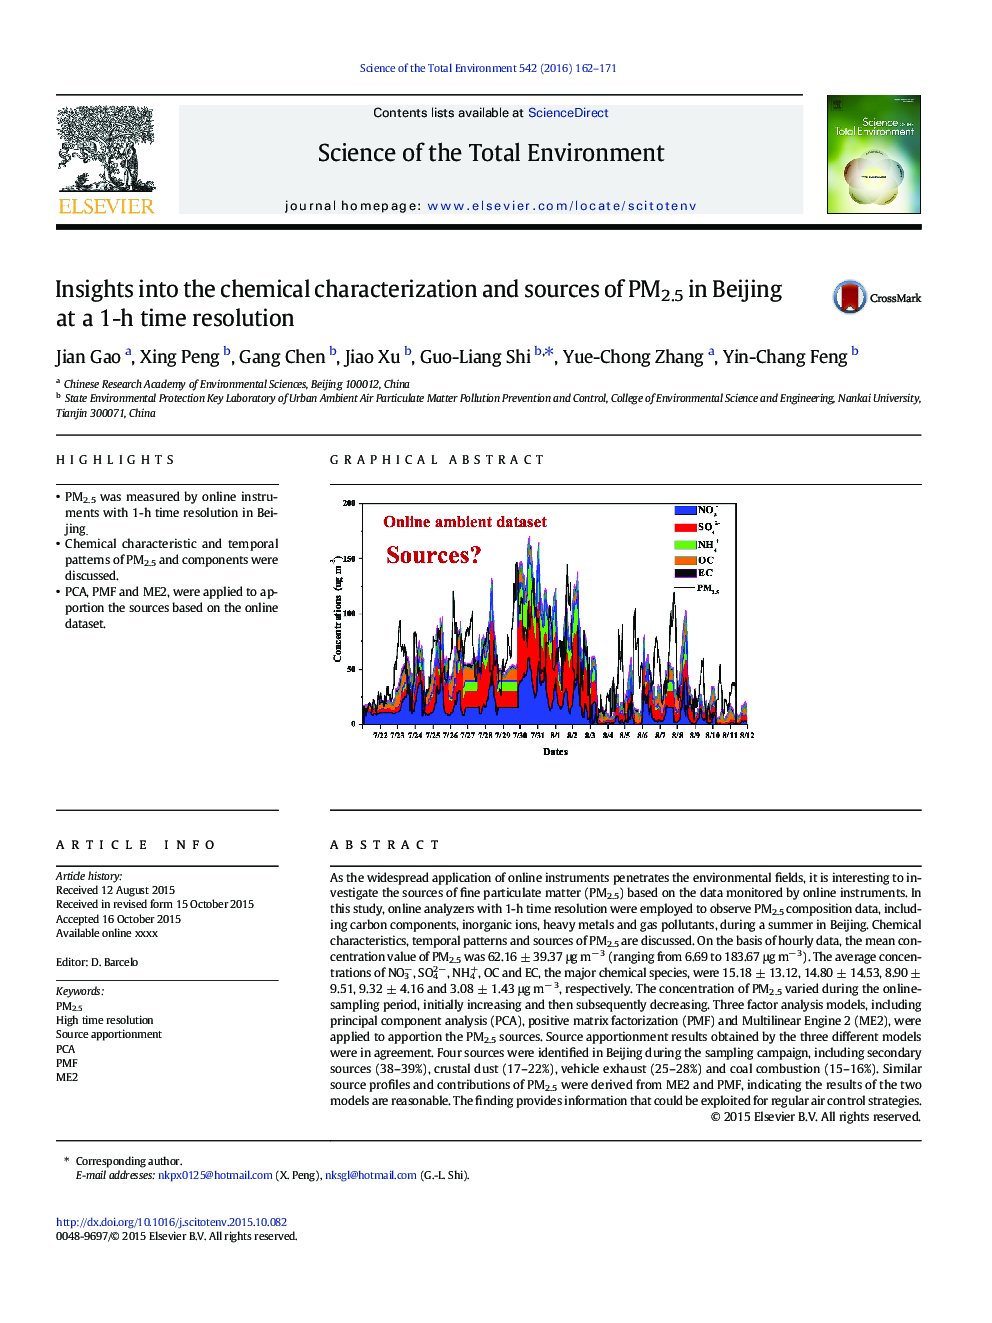 Insights into the chemical characterization and sources of PM2.5 in Beijing at a 1-h time resolution